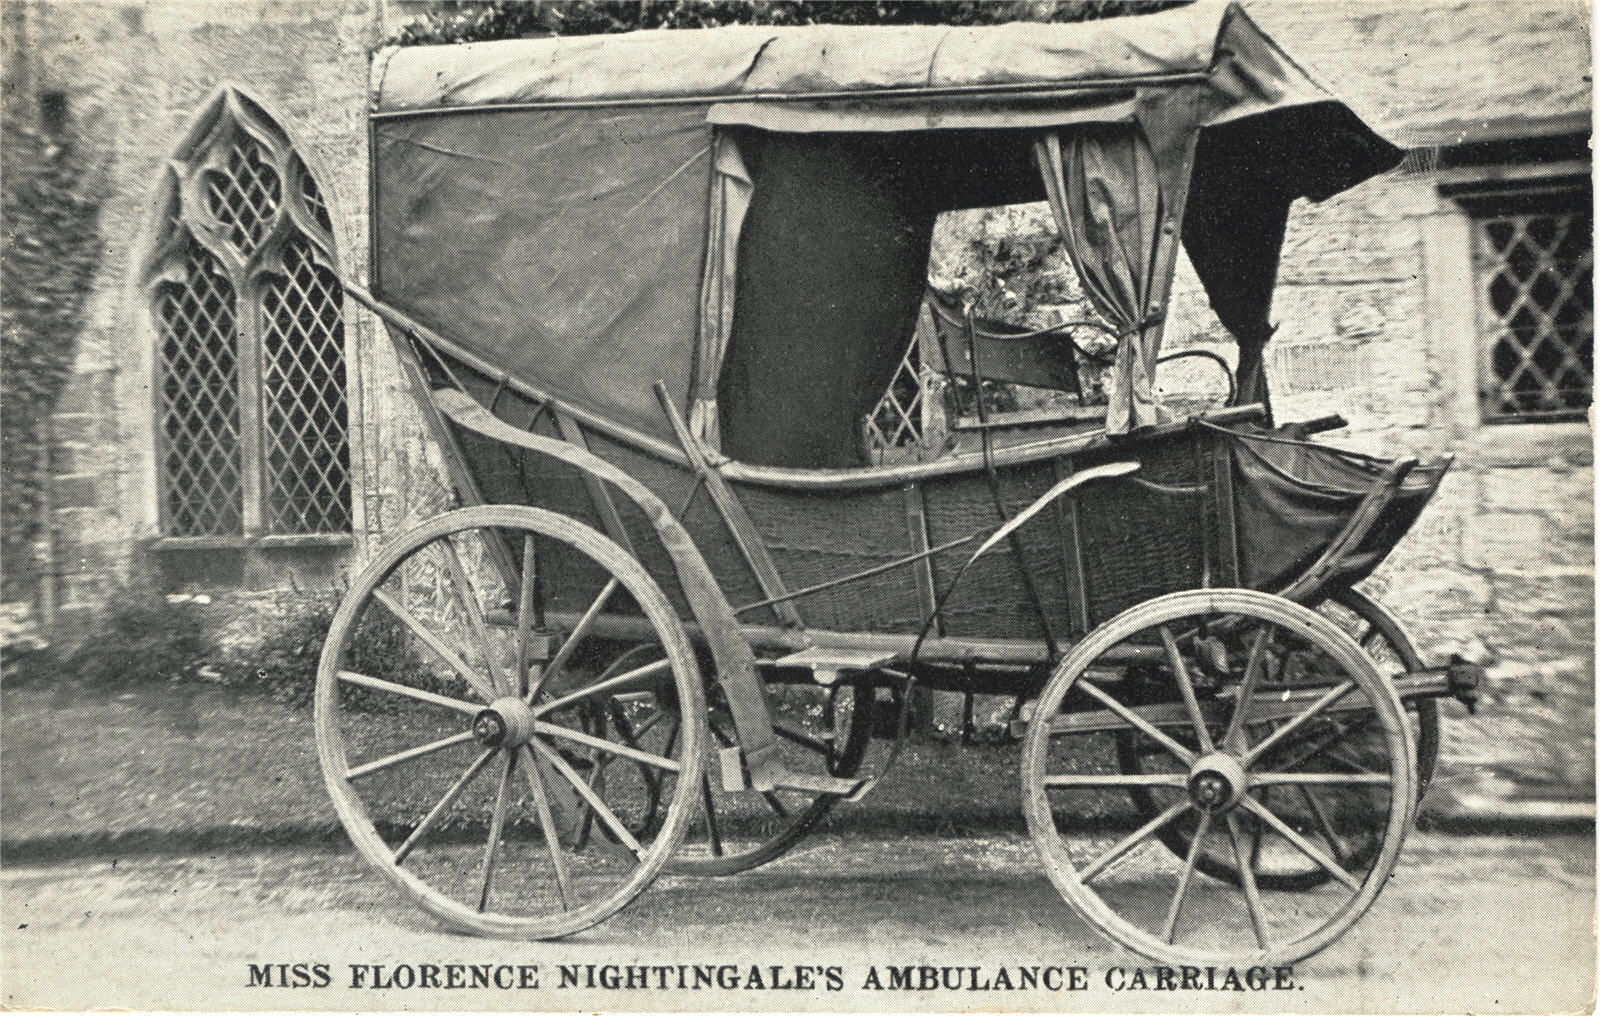 Florence Nightingale's ambulance carriage, parked outside of a stone church.